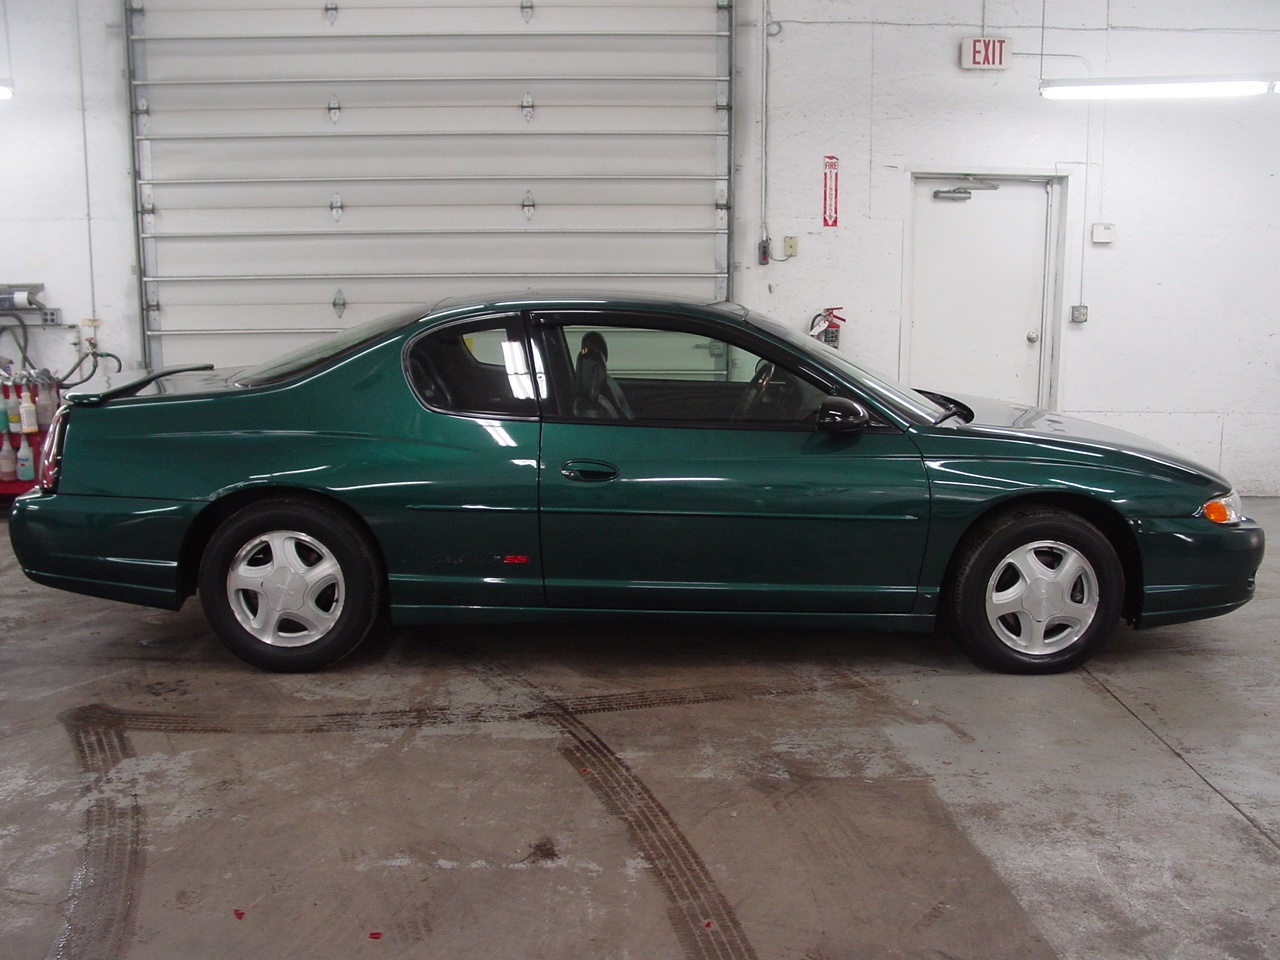 2001 Chevrolet Monte Carlo SS - Biscayne Auto Sales | Pre-owned Dealership  | Ontario, NY